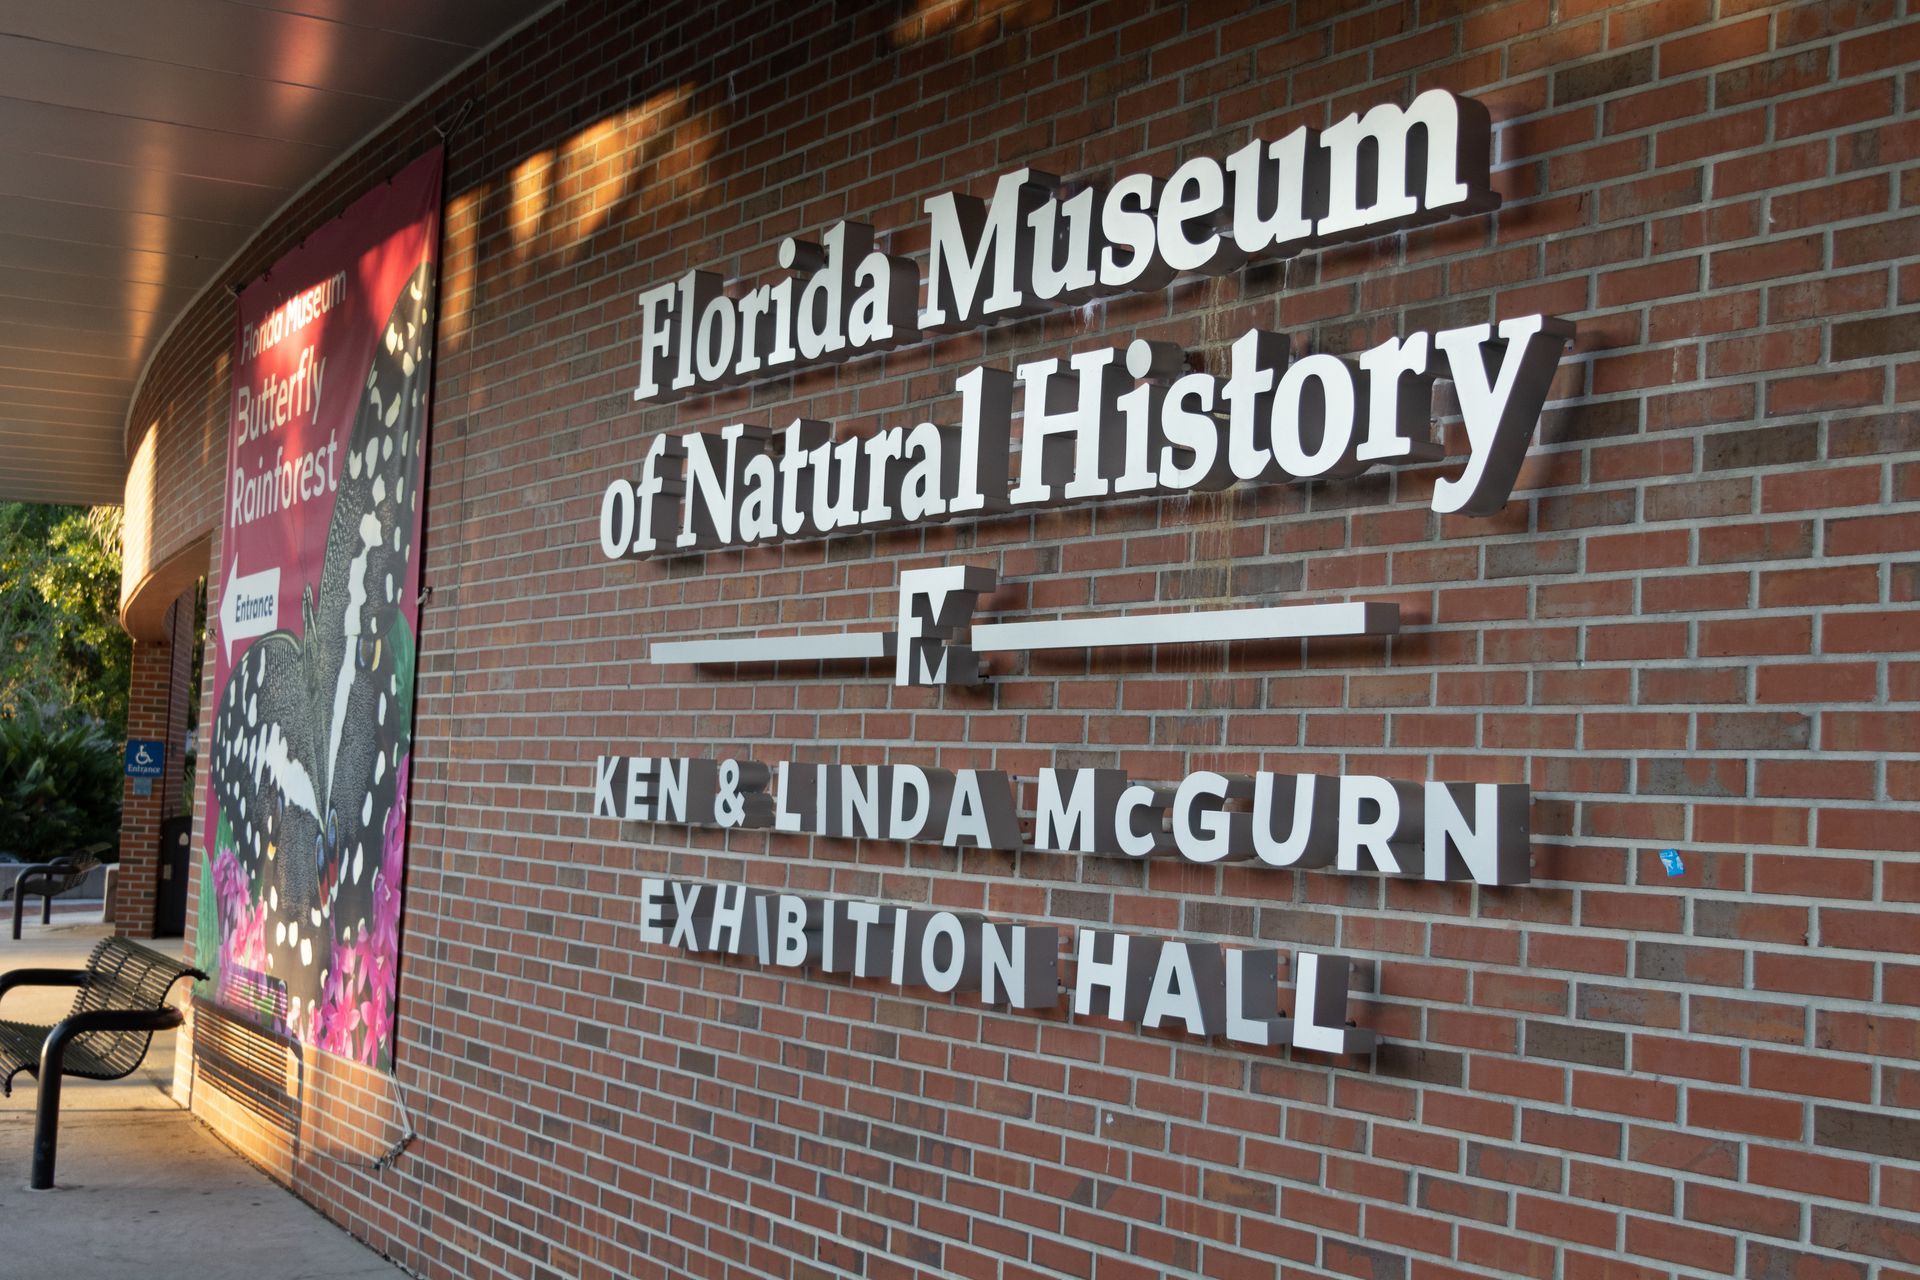 the florida museum of natural history is located in the exhibition hall